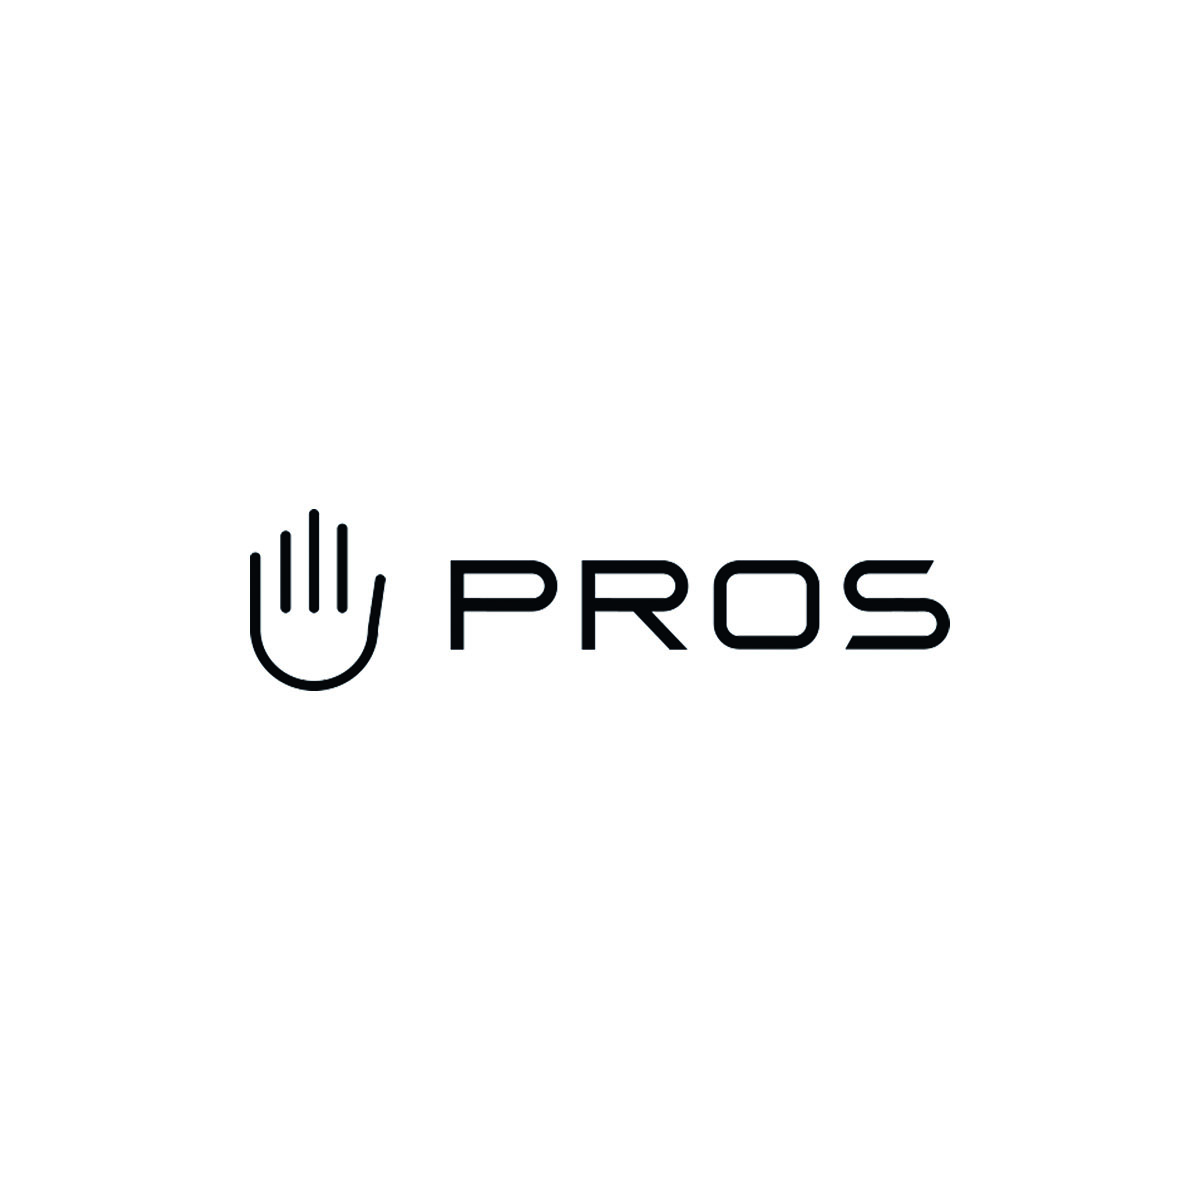 PROS - a leader in the production of professional waterproof clothing